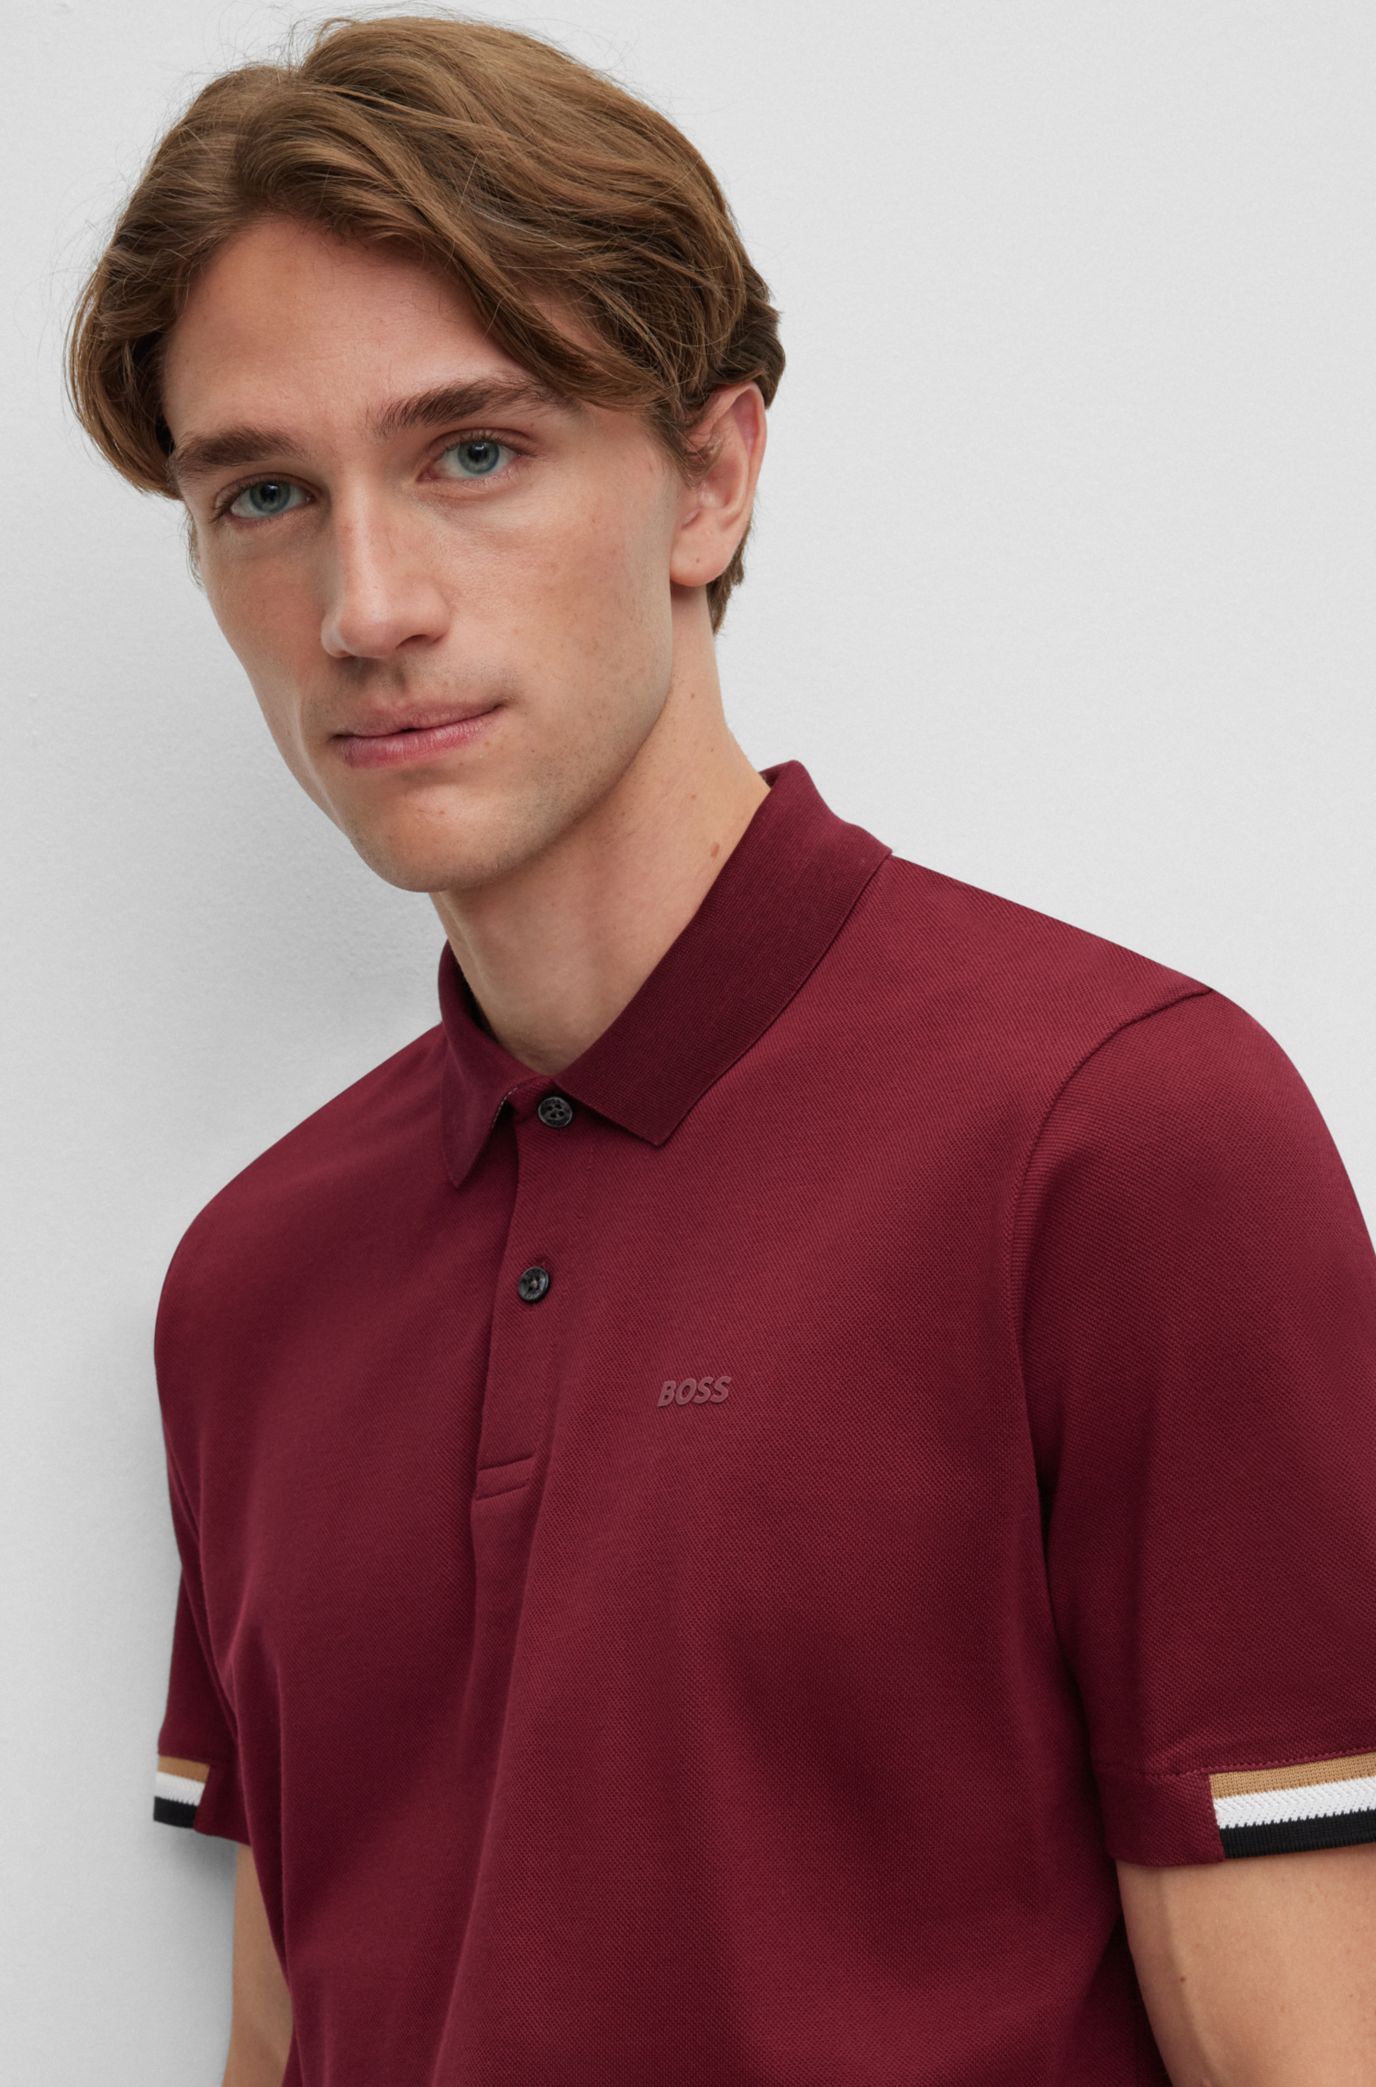 Perforated Leather Short-Sleeved Shirt - Men - Ready-to-Wear